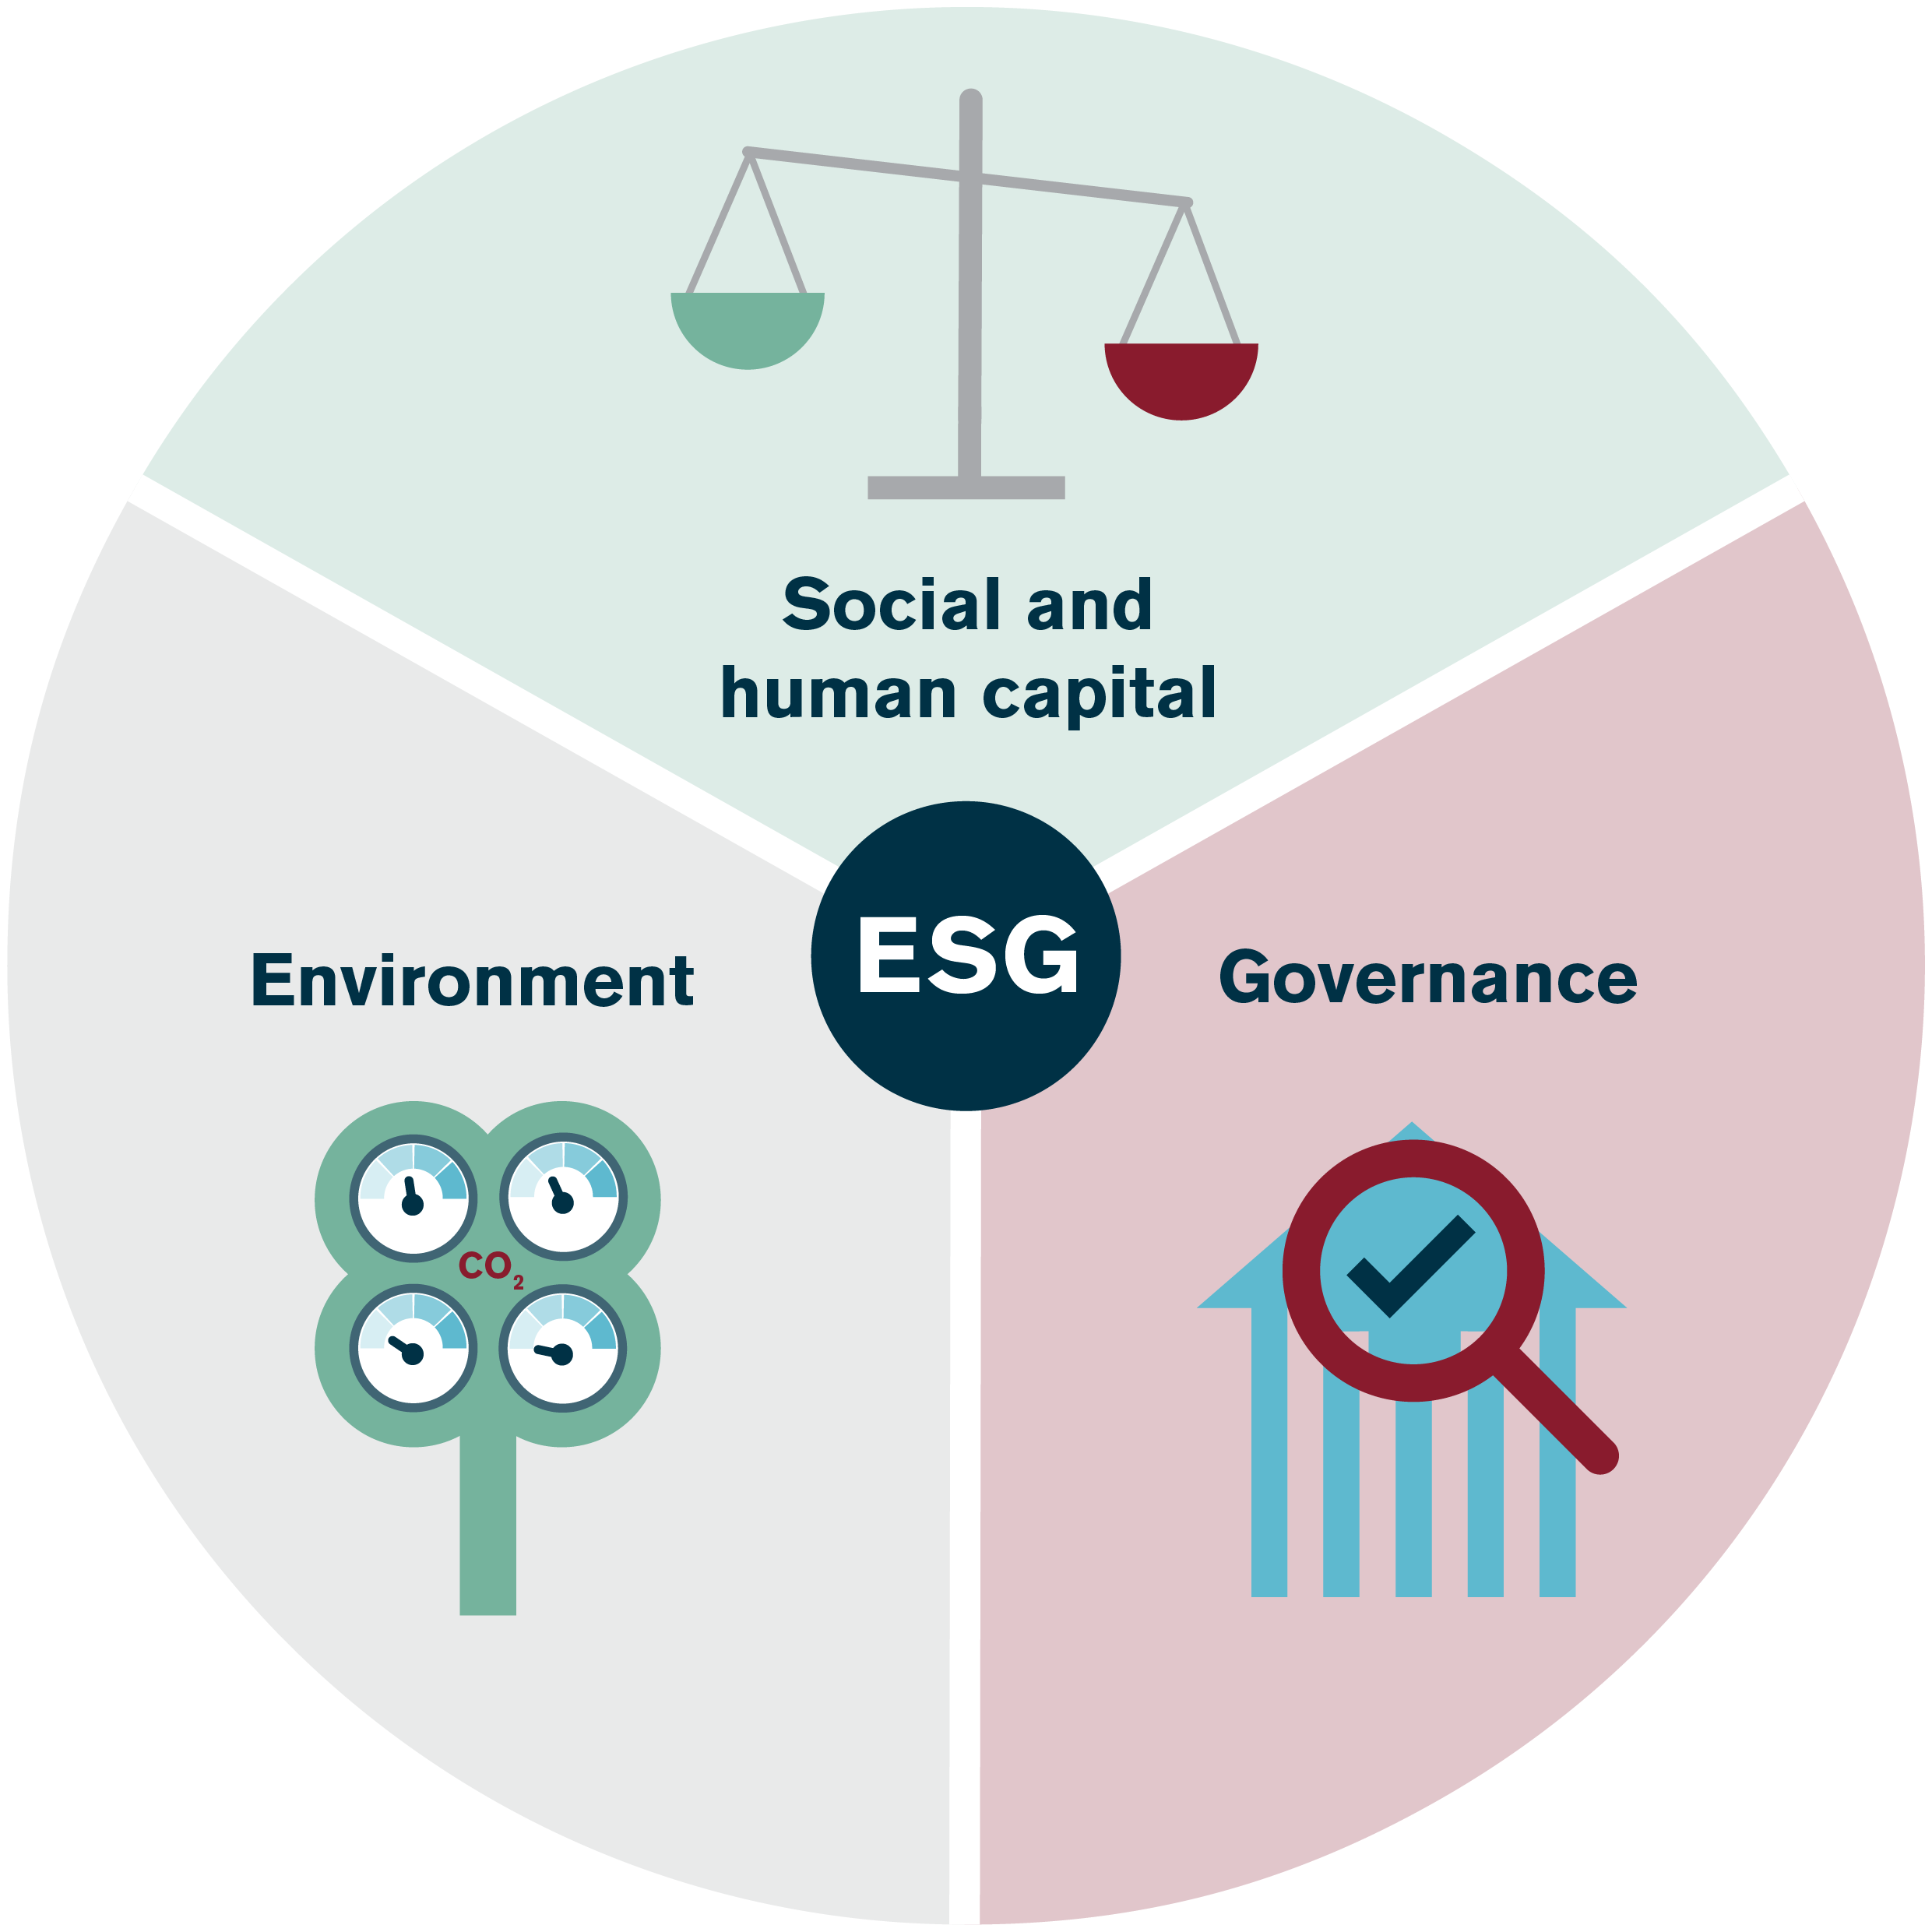 ESG, sustainability and responsible business